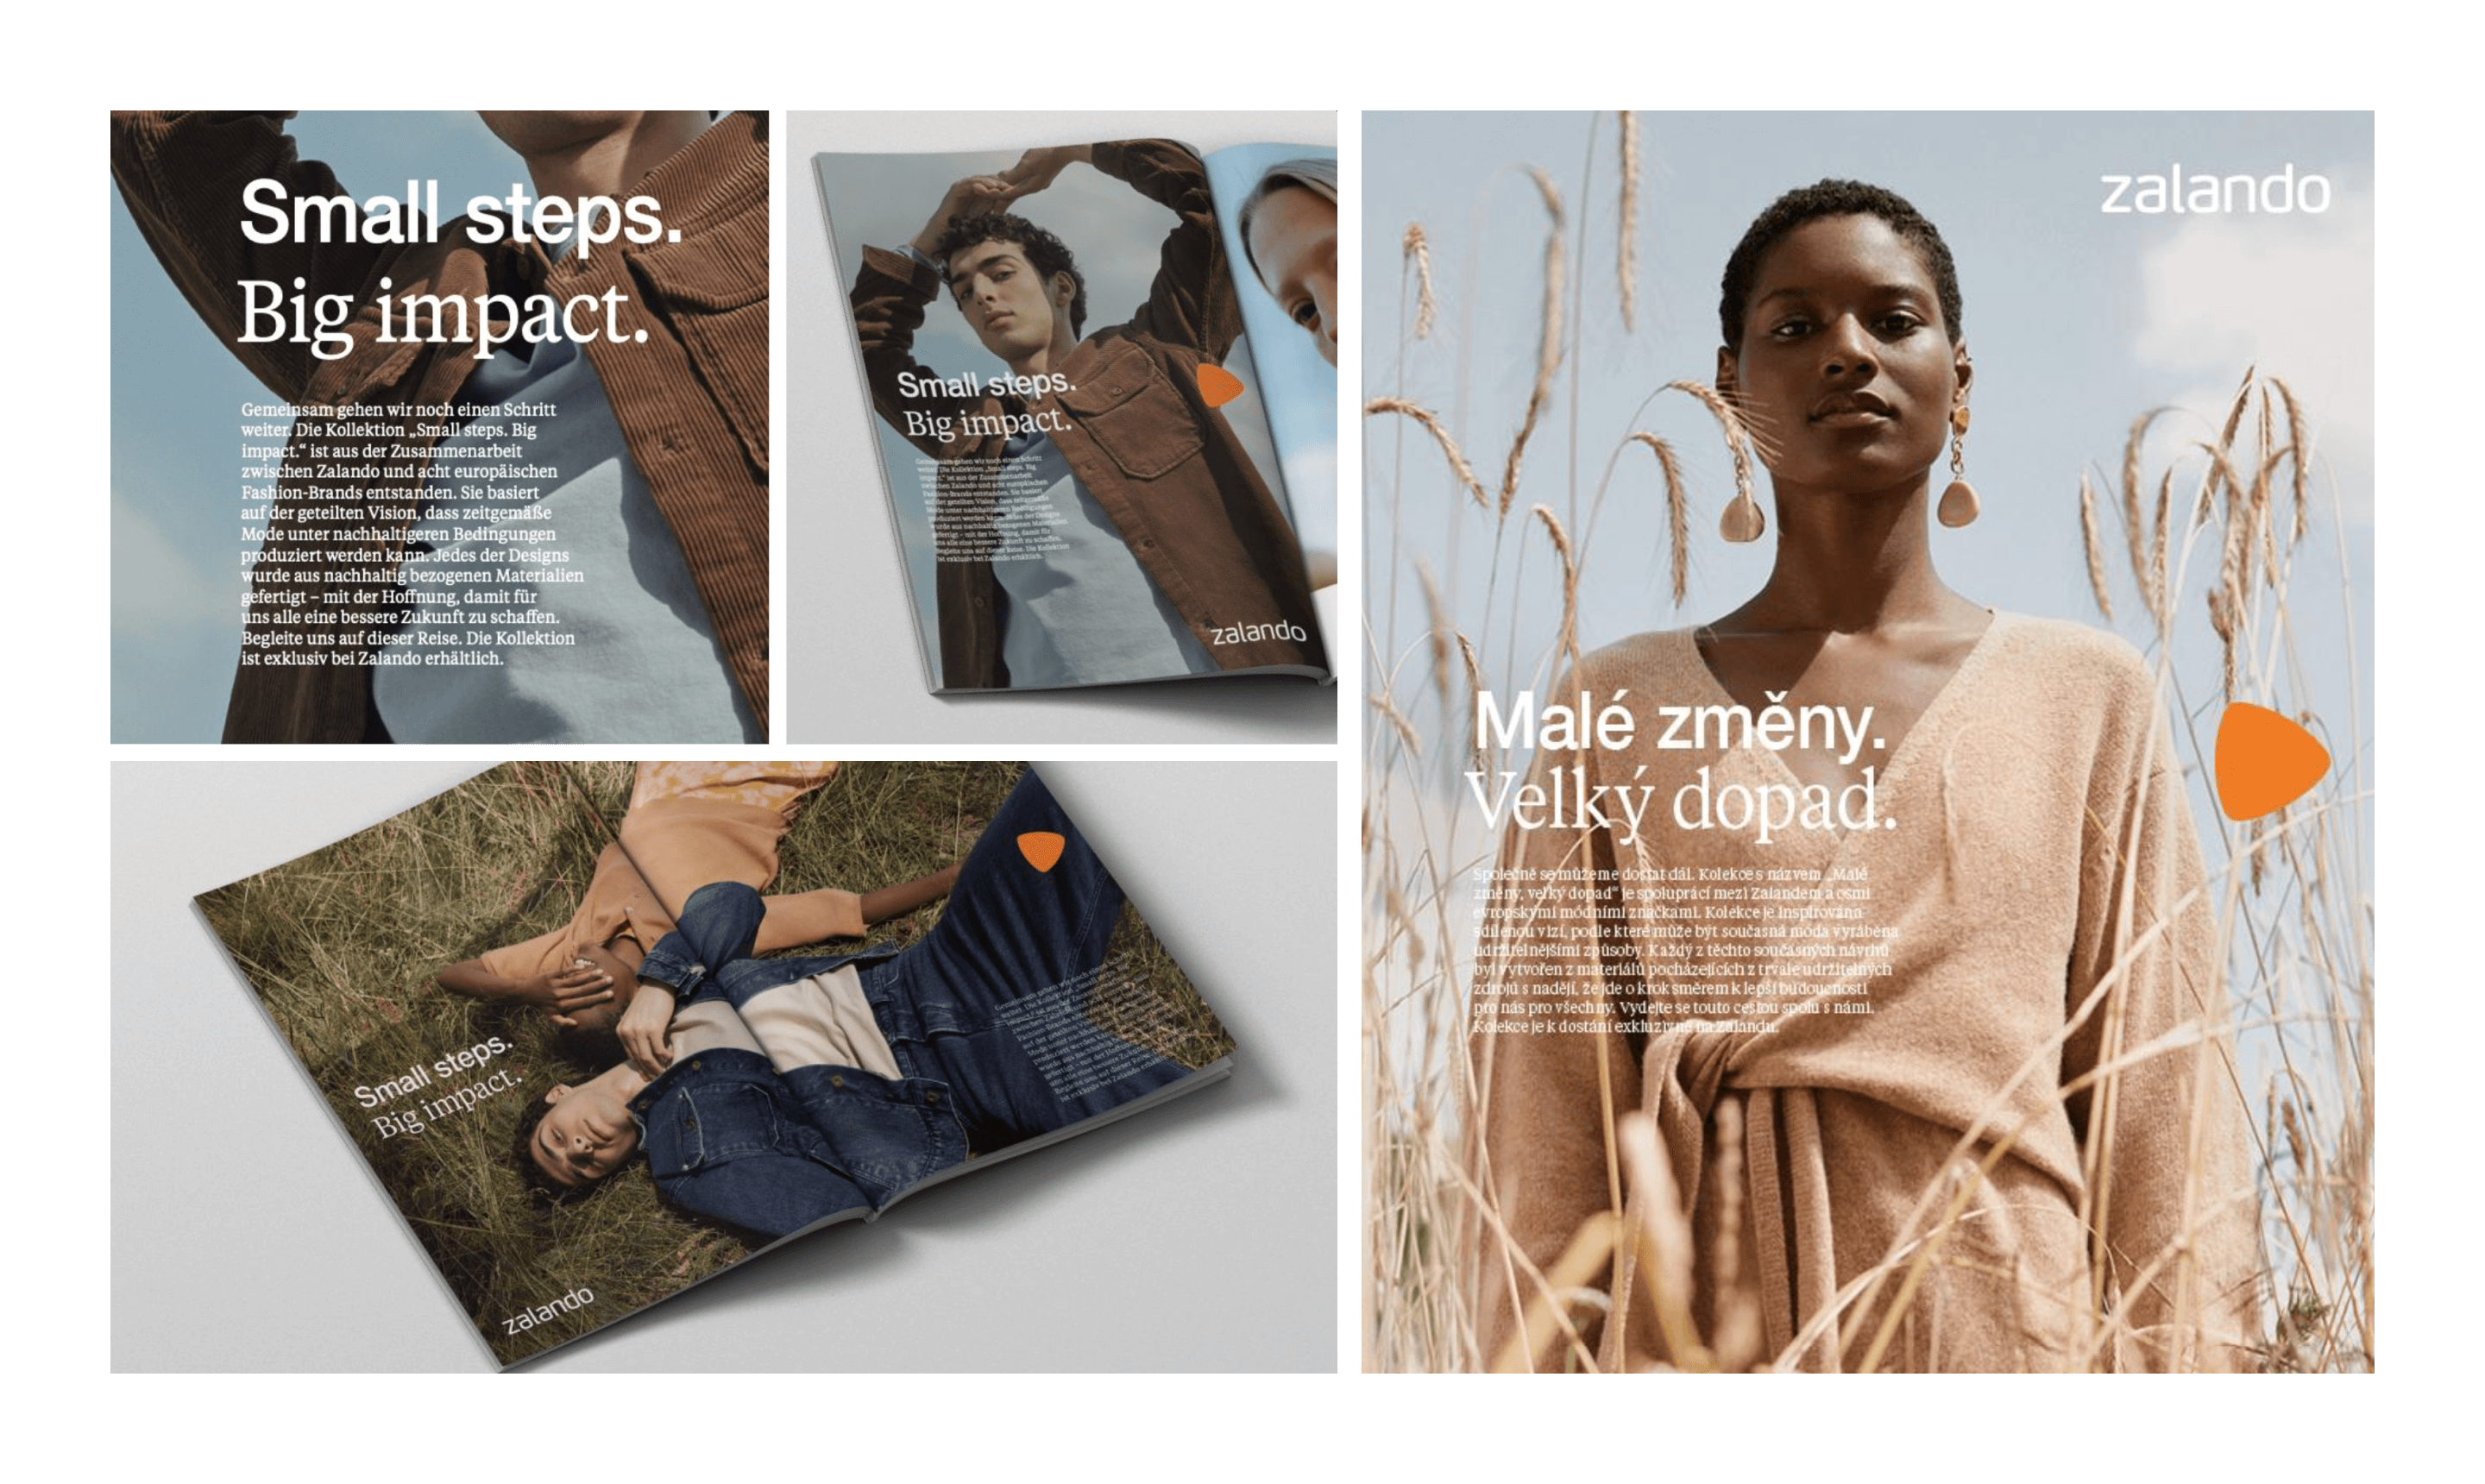 Application of the type pairing in a magazine spread. Design by Zalando's MS&C team